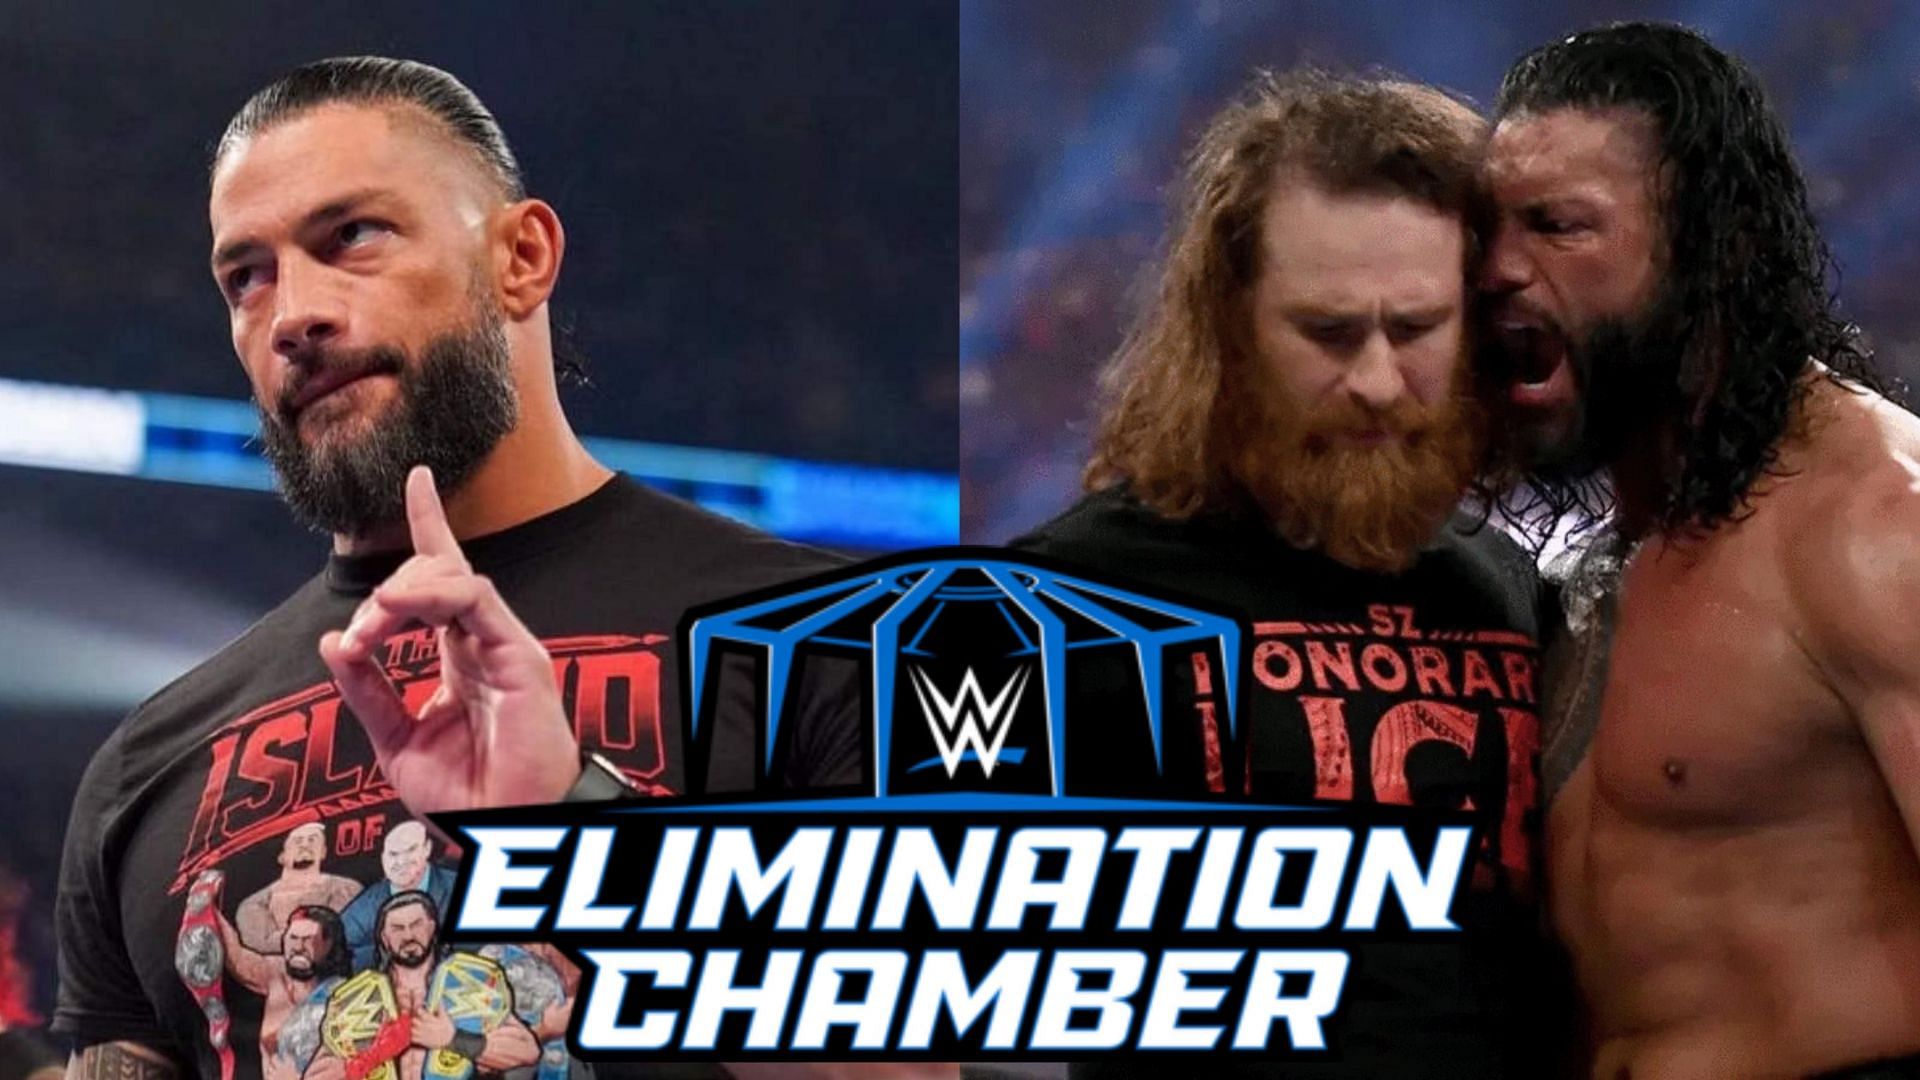 Roman Reigns is set to defend his titles against Sami Zayn this Saturday